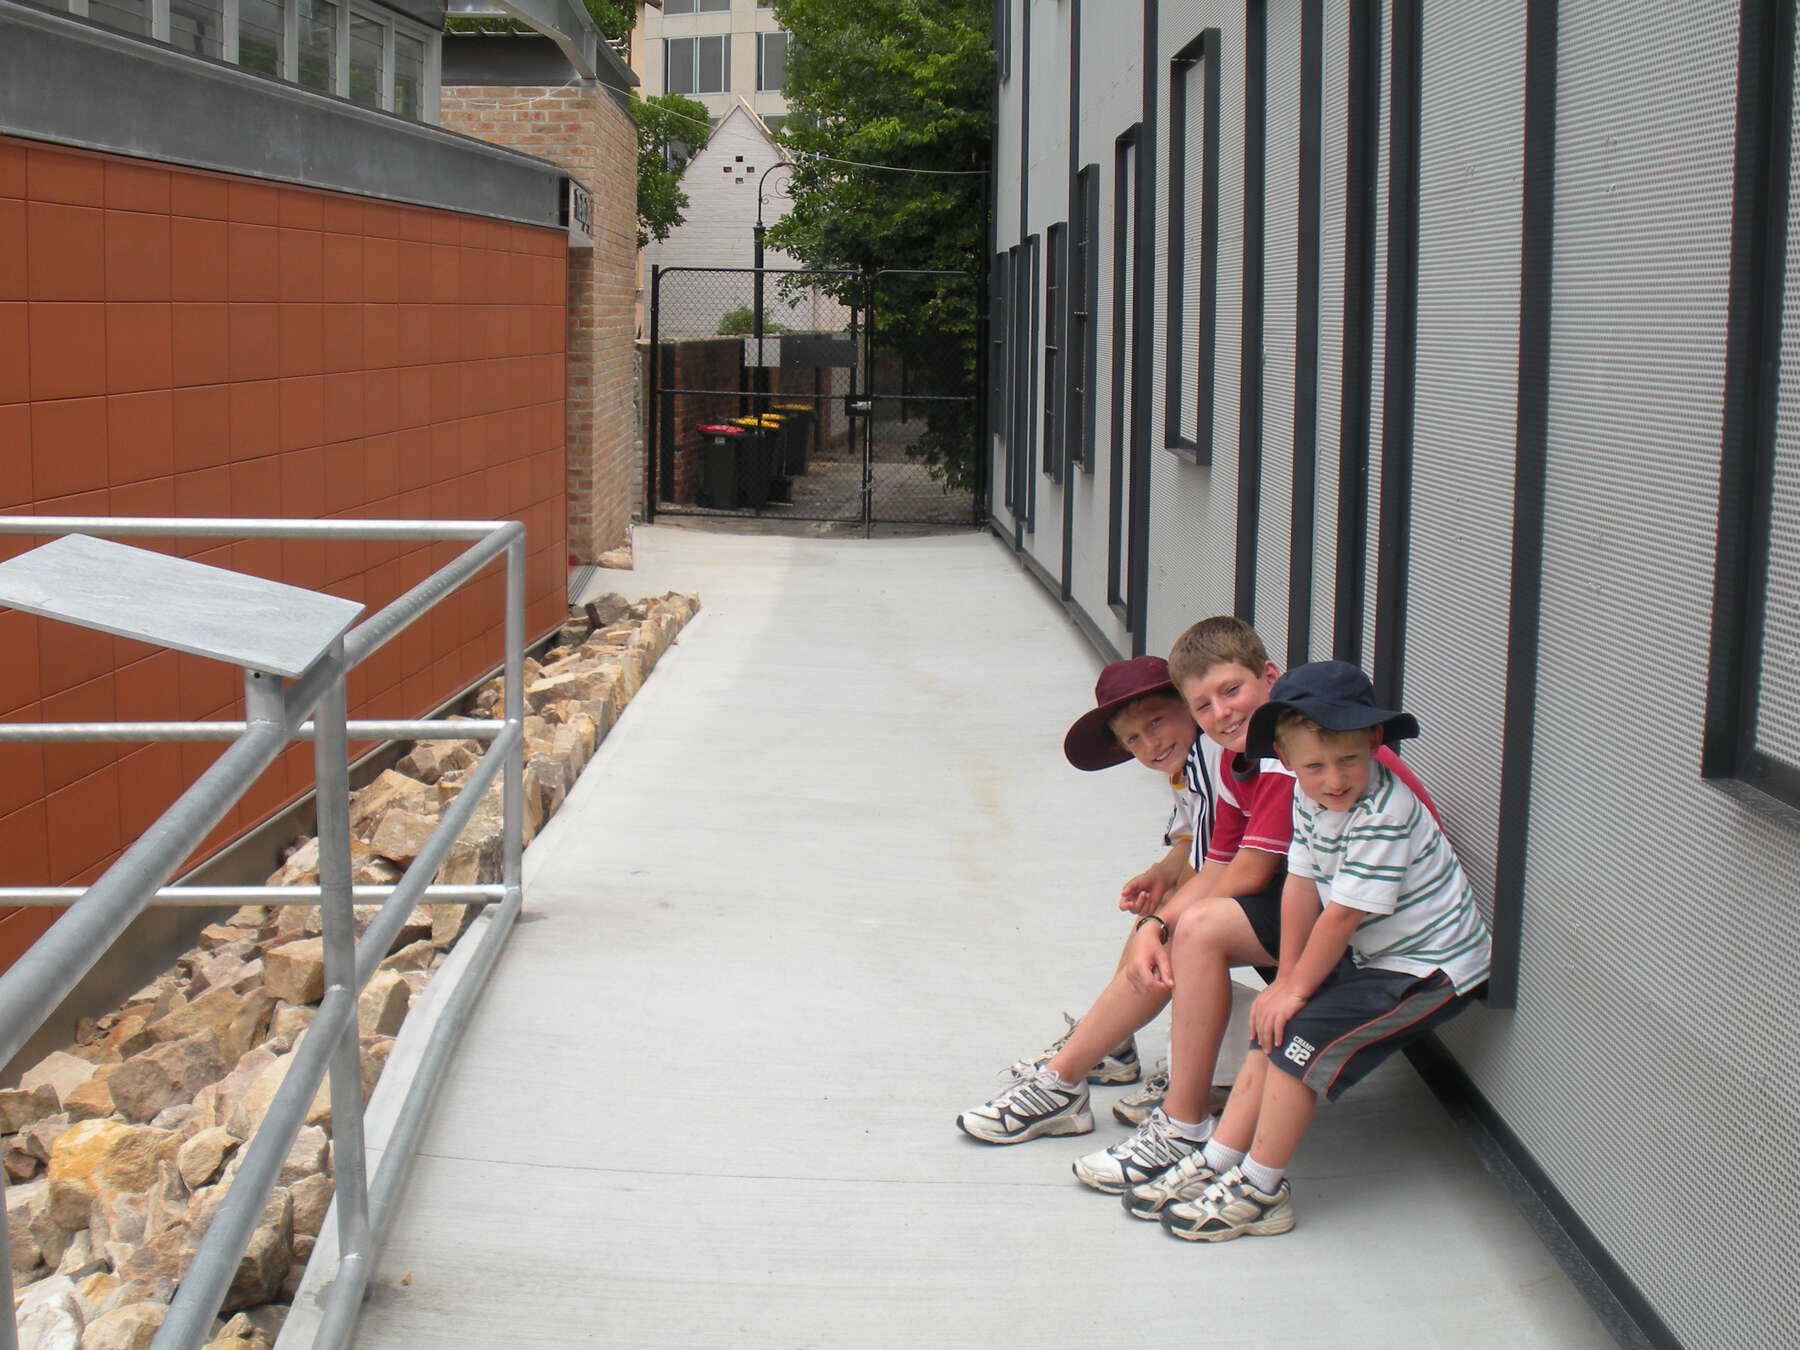 View of a small lane with new modern buildings all around and on the right, three boys lean against a wall.